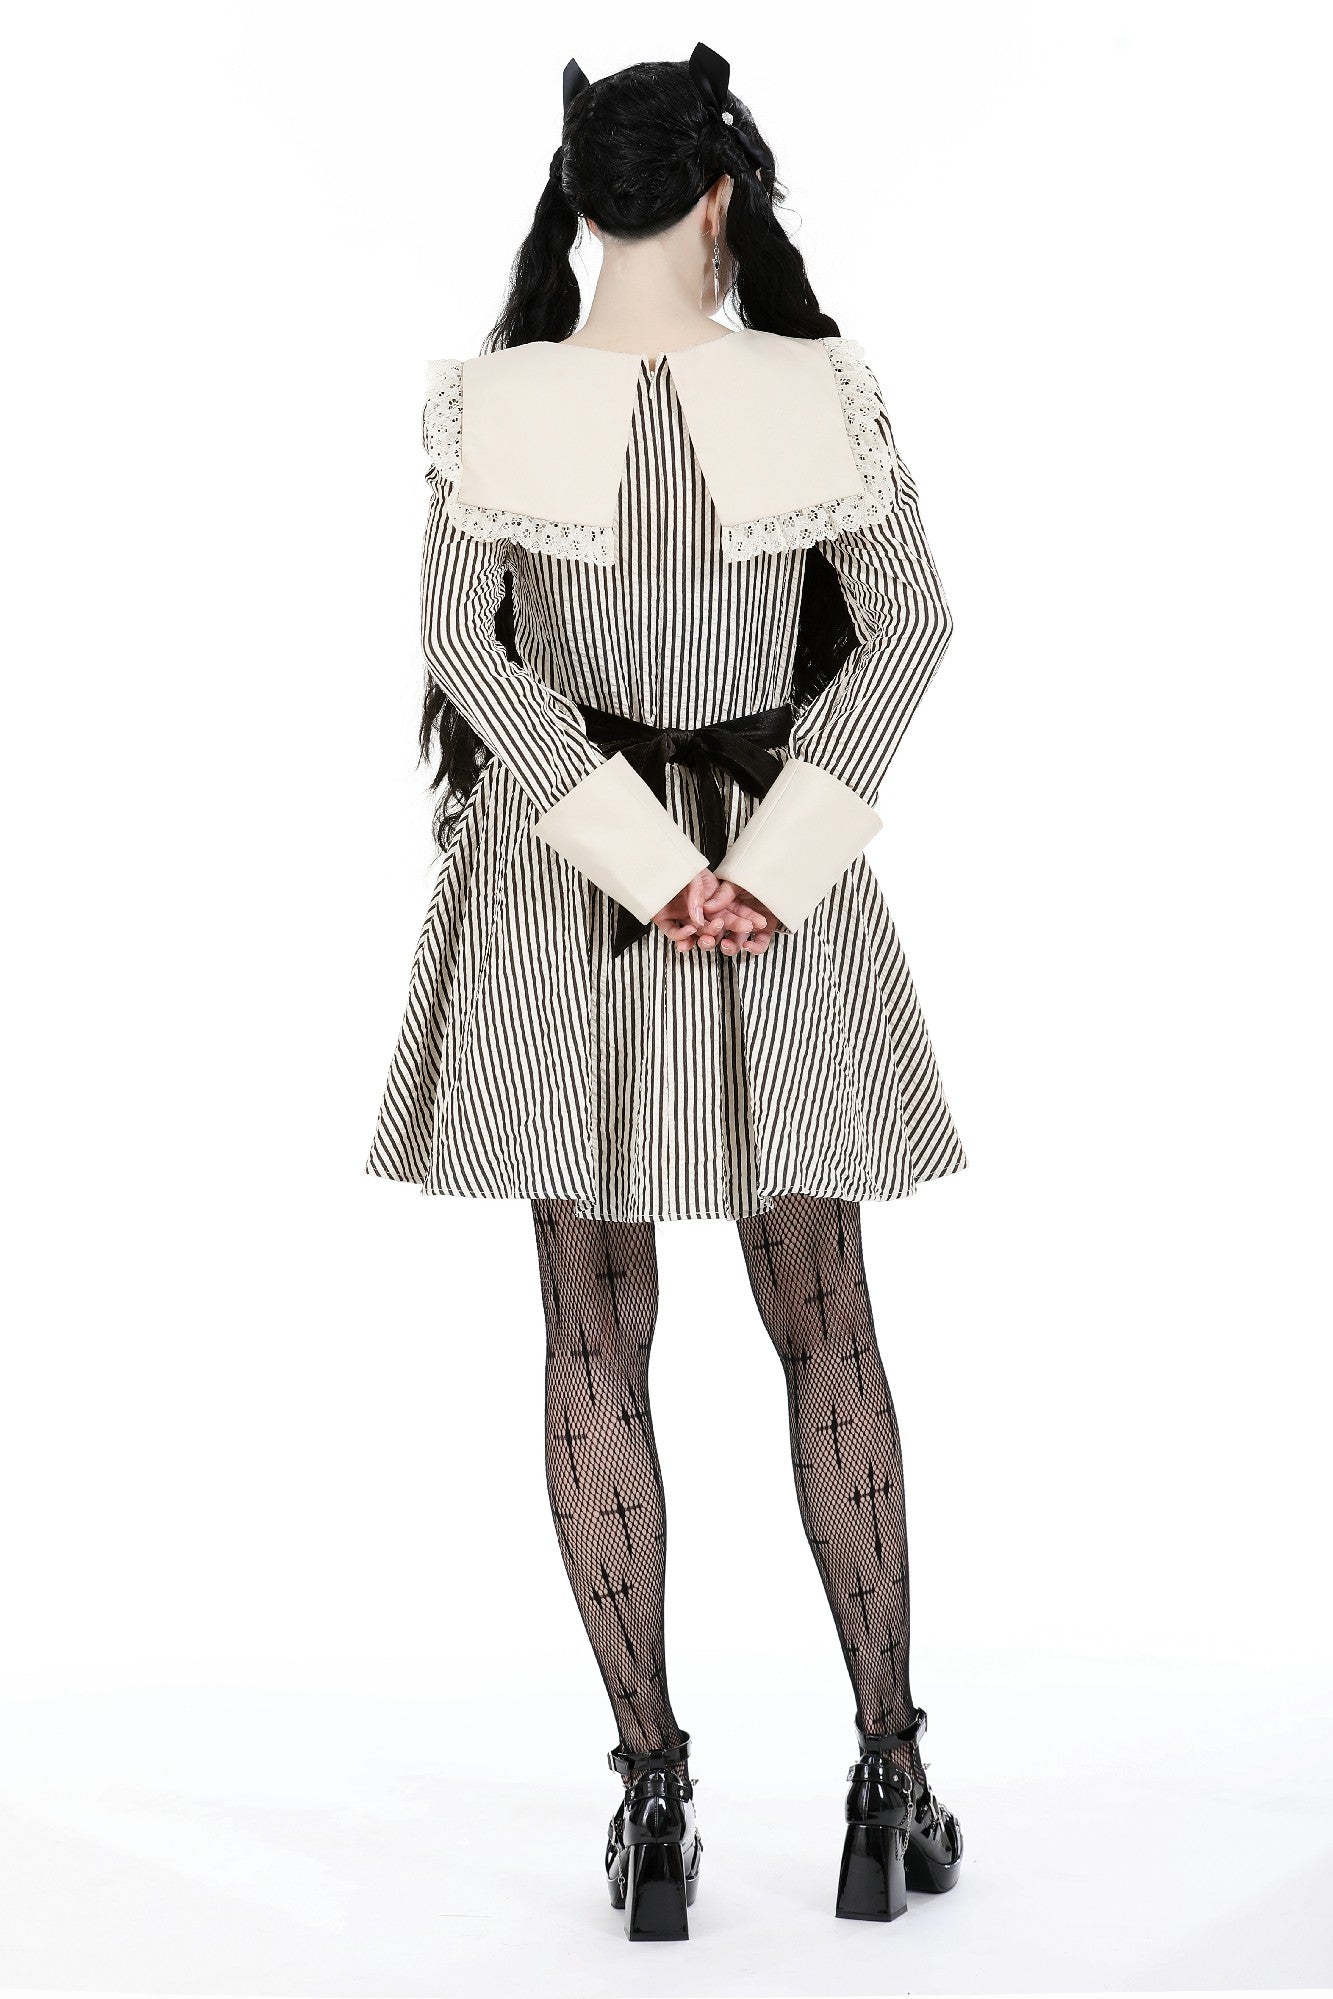 Eerie Dolly Gothic Striped Dress by Dark In Love